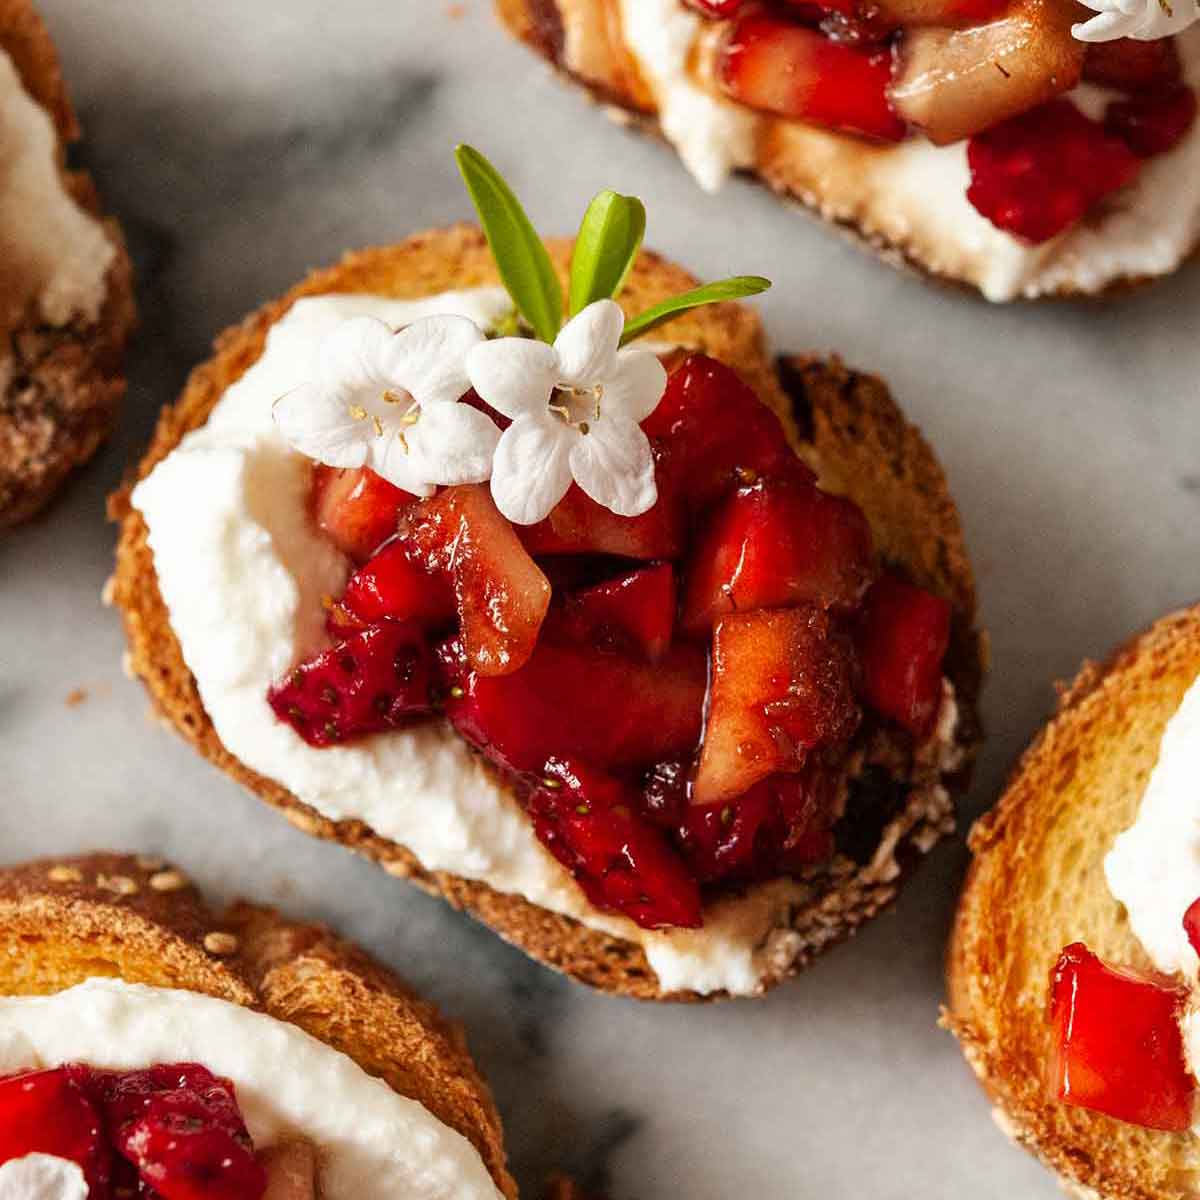 A balsamic strawberry crostini, garnished with a few small flowers, surrounded by others on a marble plate.